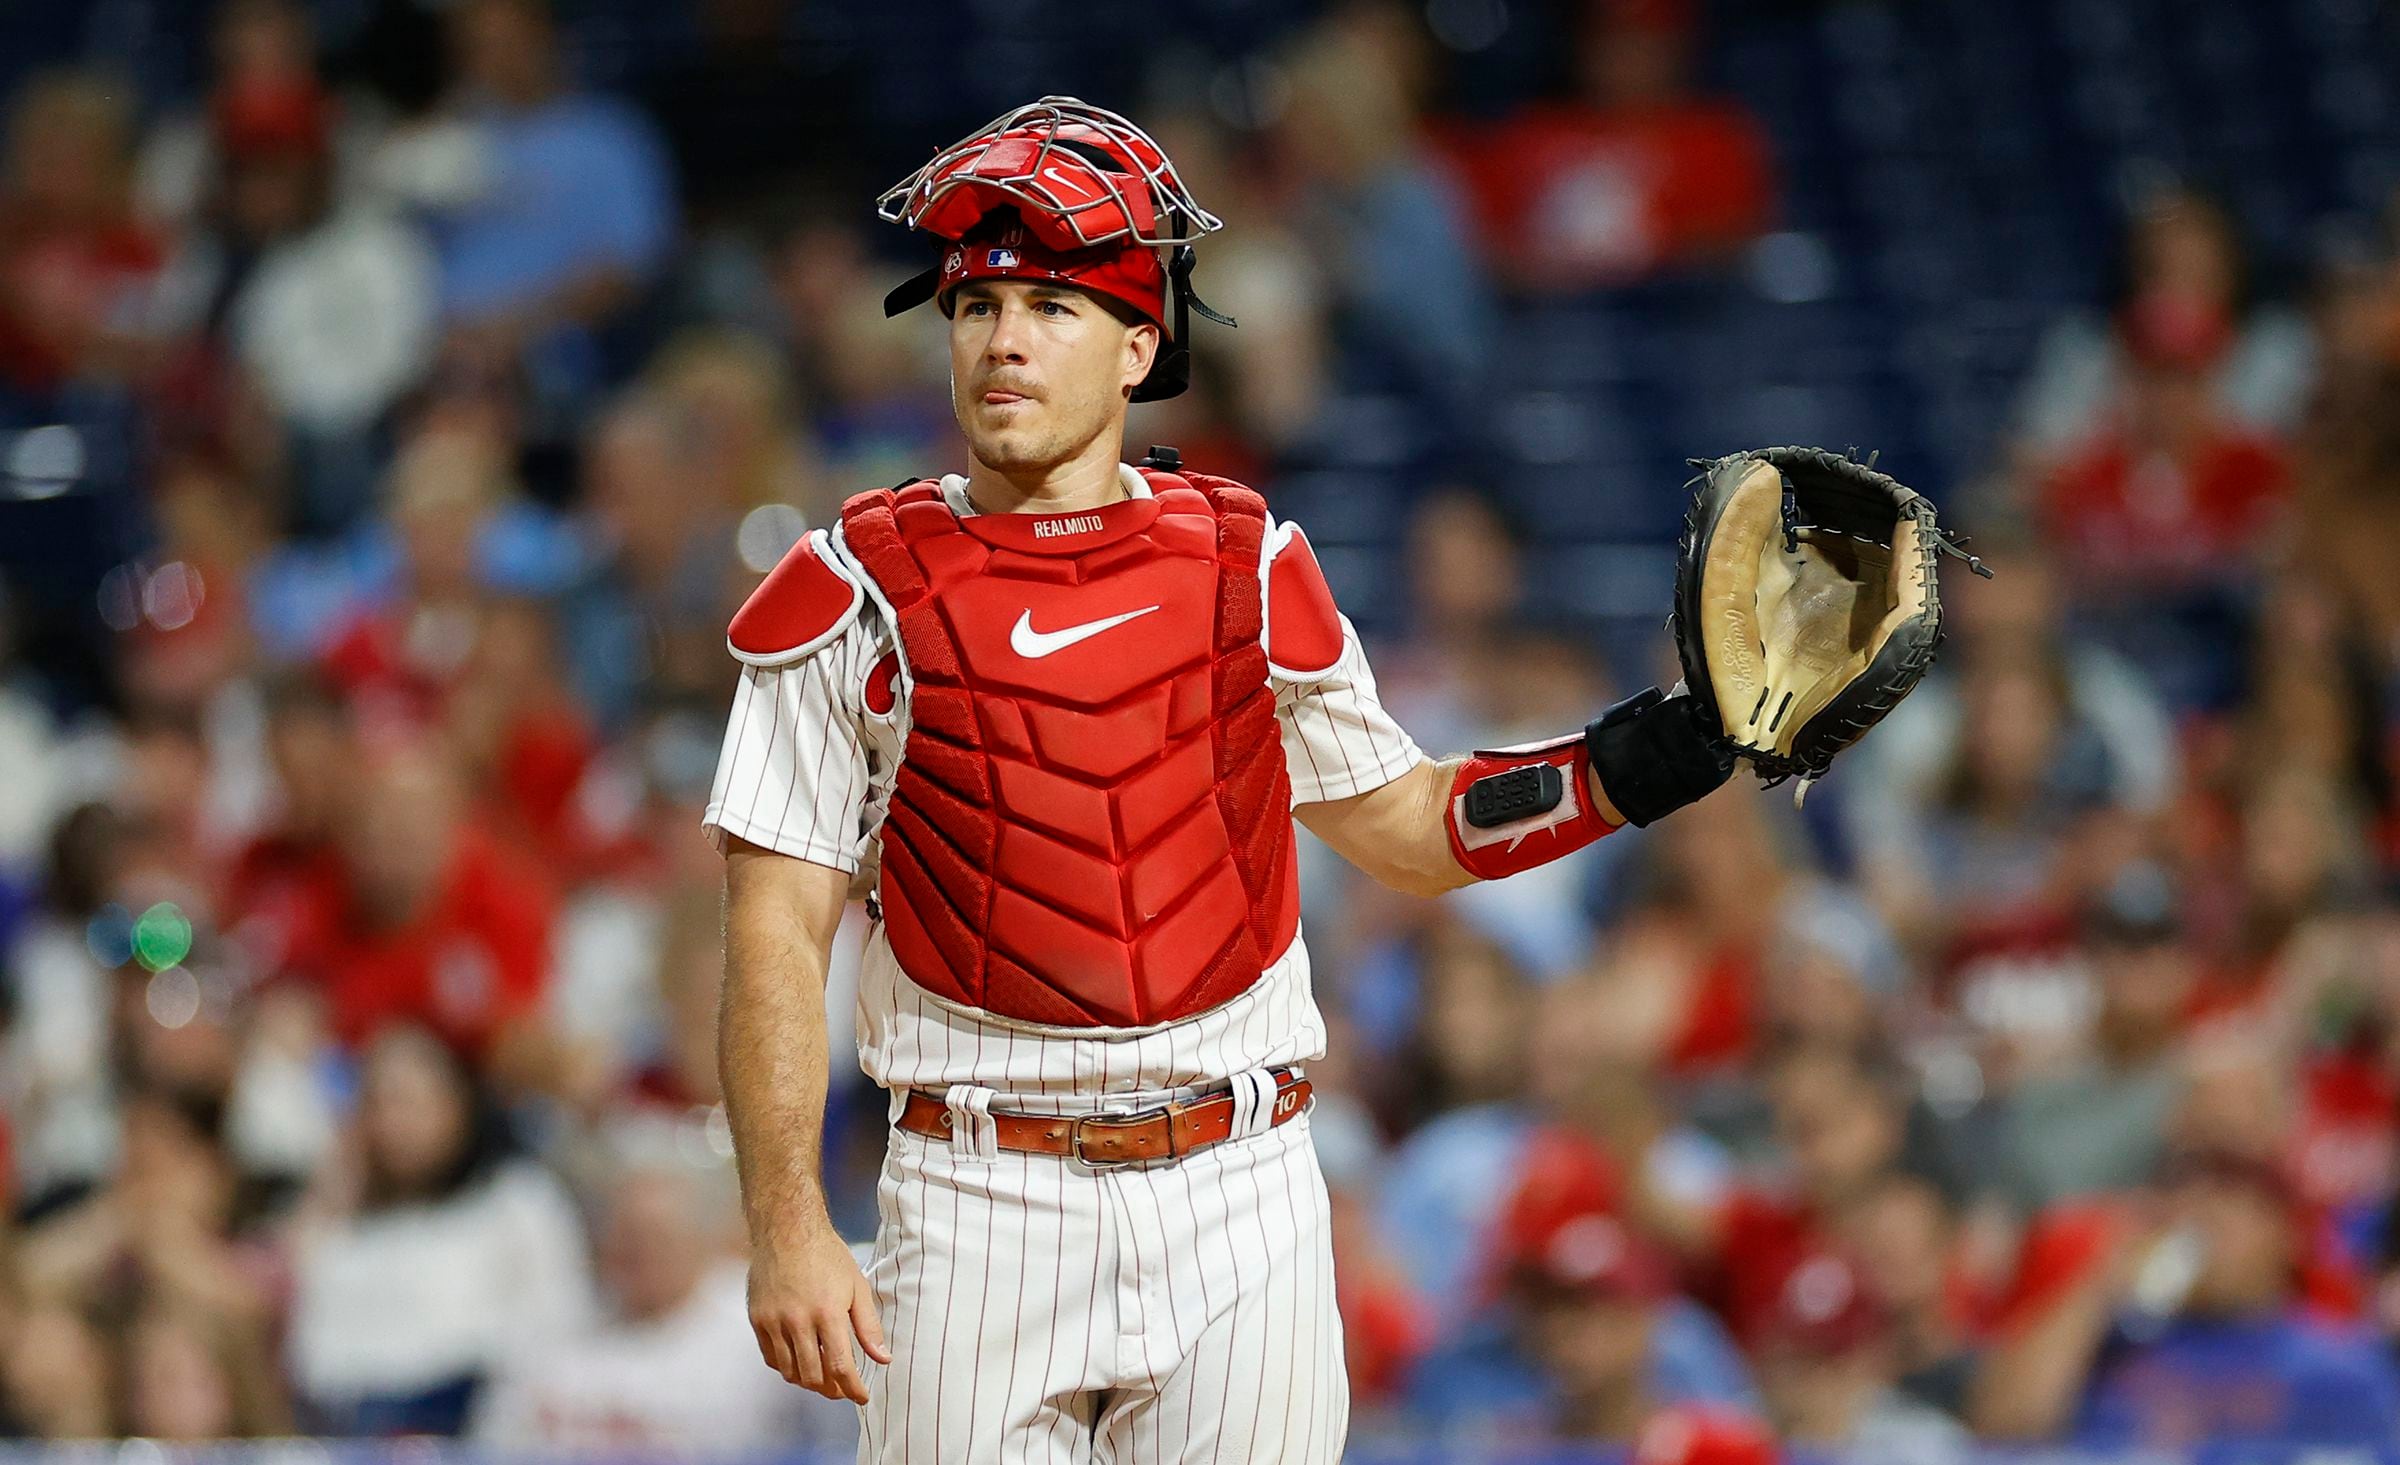 Realmuto 'happy' to be with Phillies, would welcome Bryce Harper as a  teammate ~ Philadelphia Baseball Review - Phillies News, Rumors and Analysis